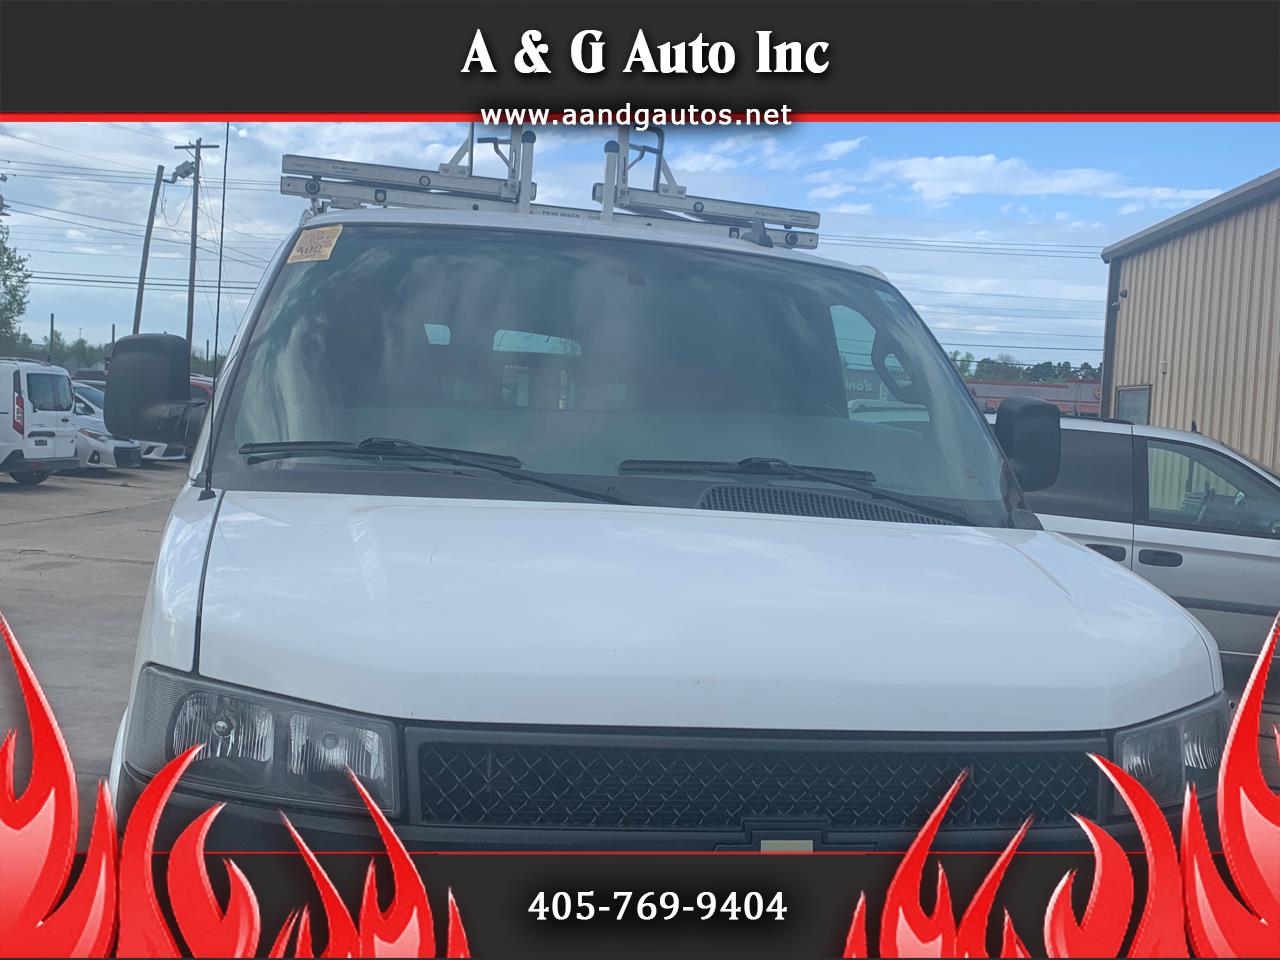 2019 Chevrolet Express for sale in Oklahoma City OK 73141 by A & G Auto Inc